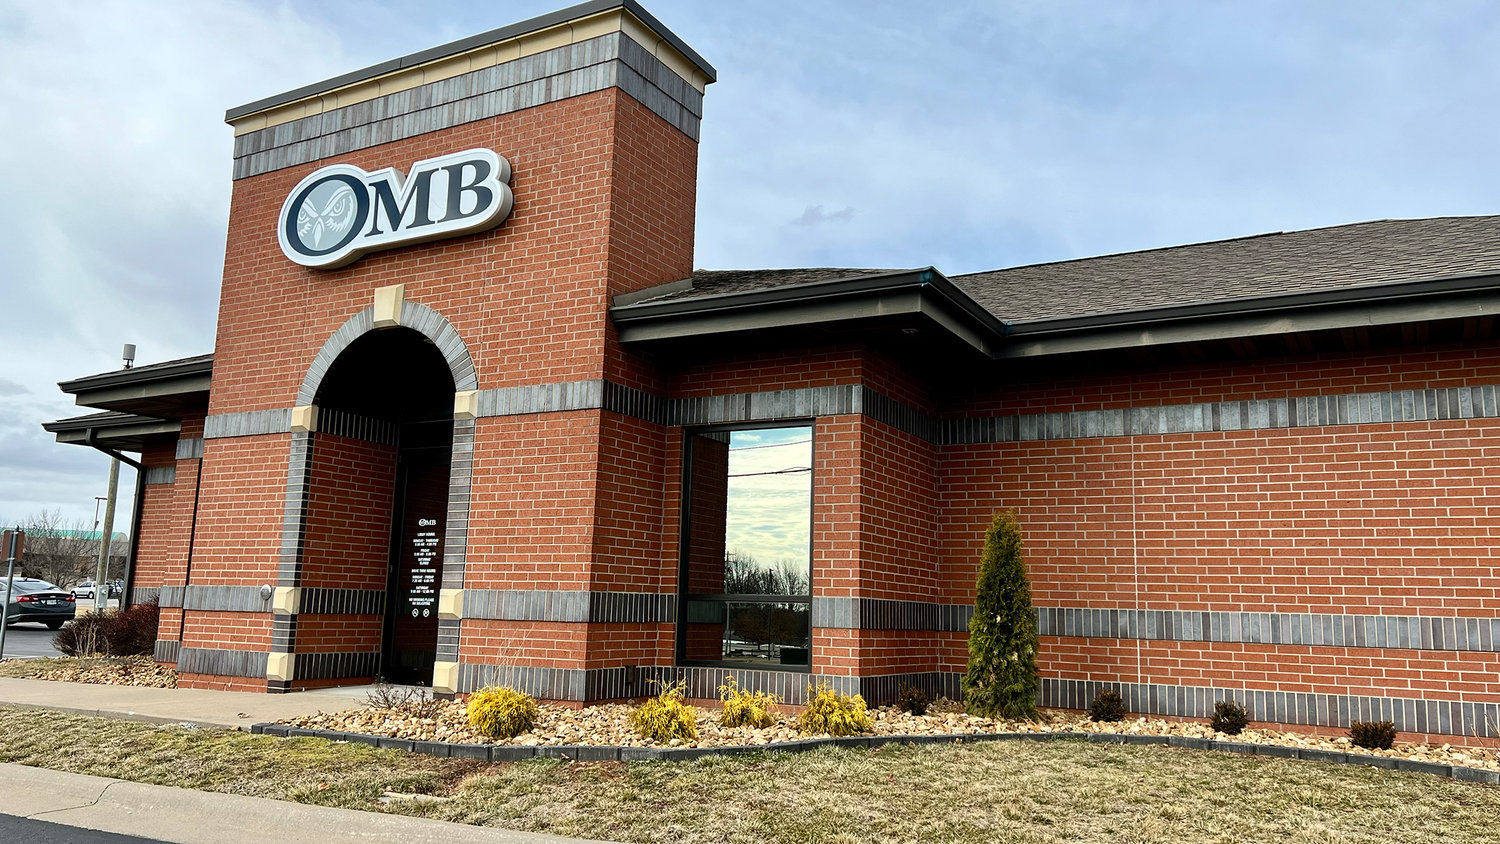 Old Missouri Bank is now operating a branch out of a former Simmons Bank building on West Republic Road.